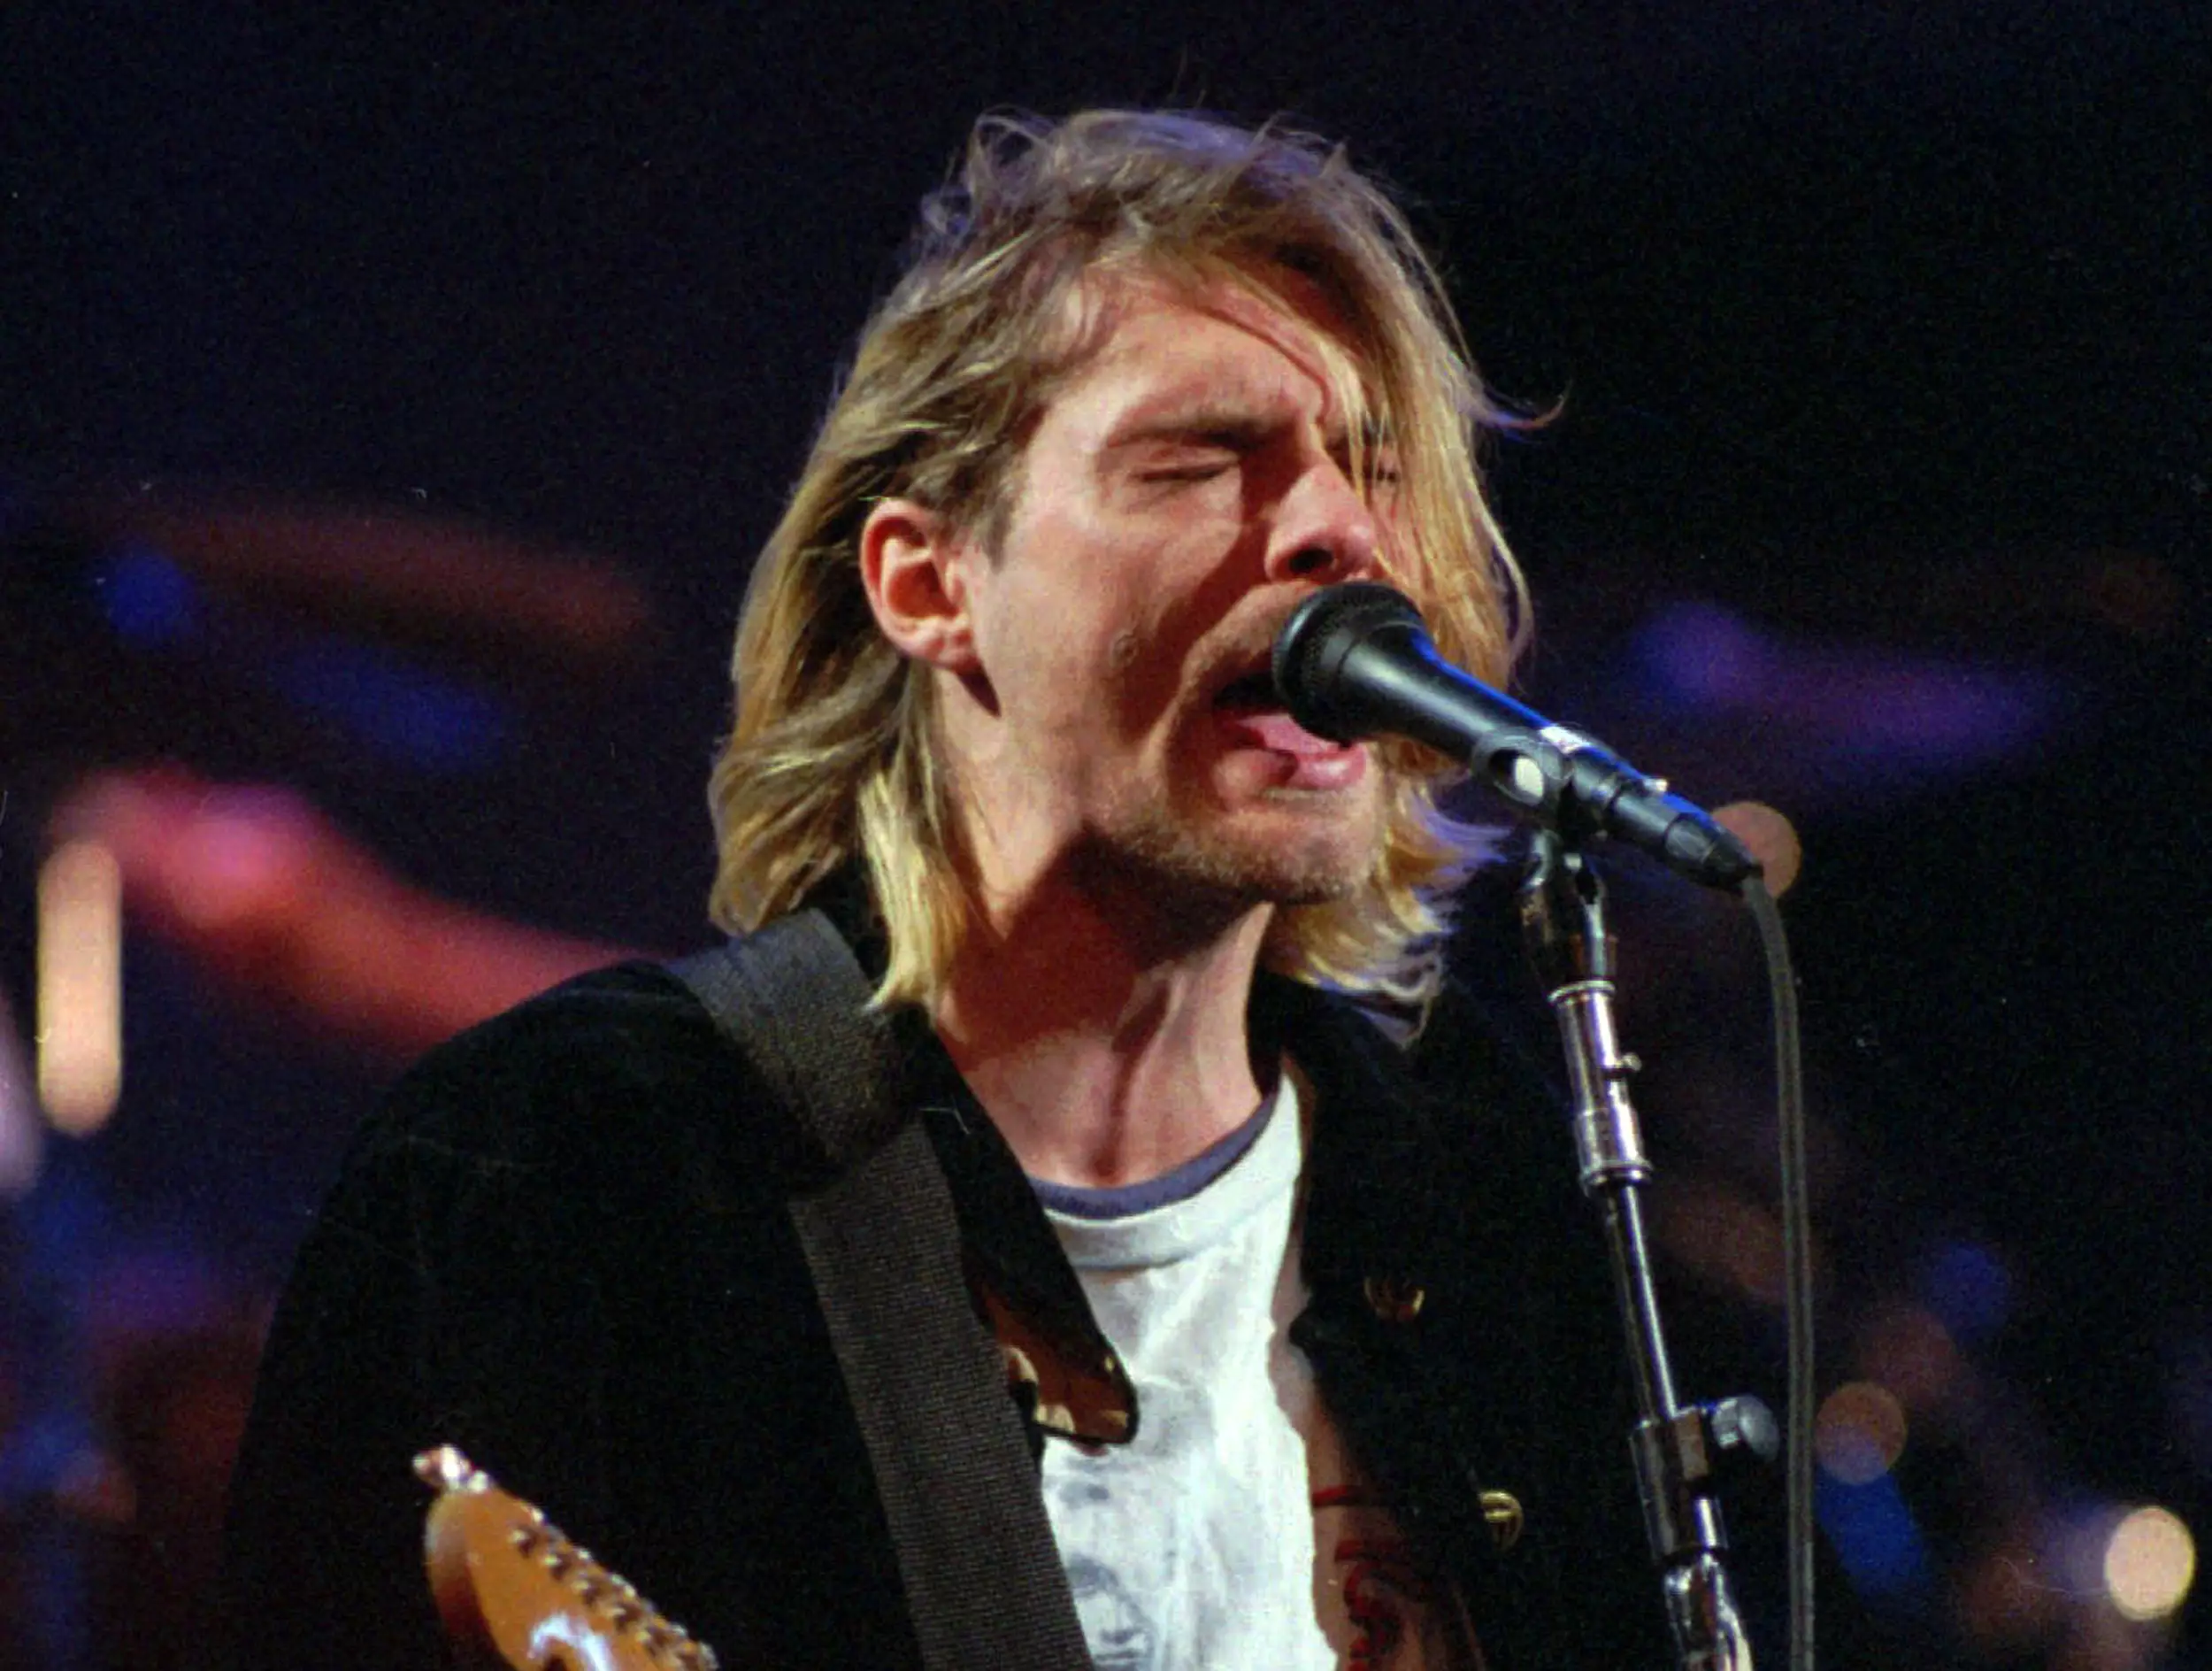 Author Claims The CIA Murdered Kurt Cobain After Getting Him Addicted To Heroin